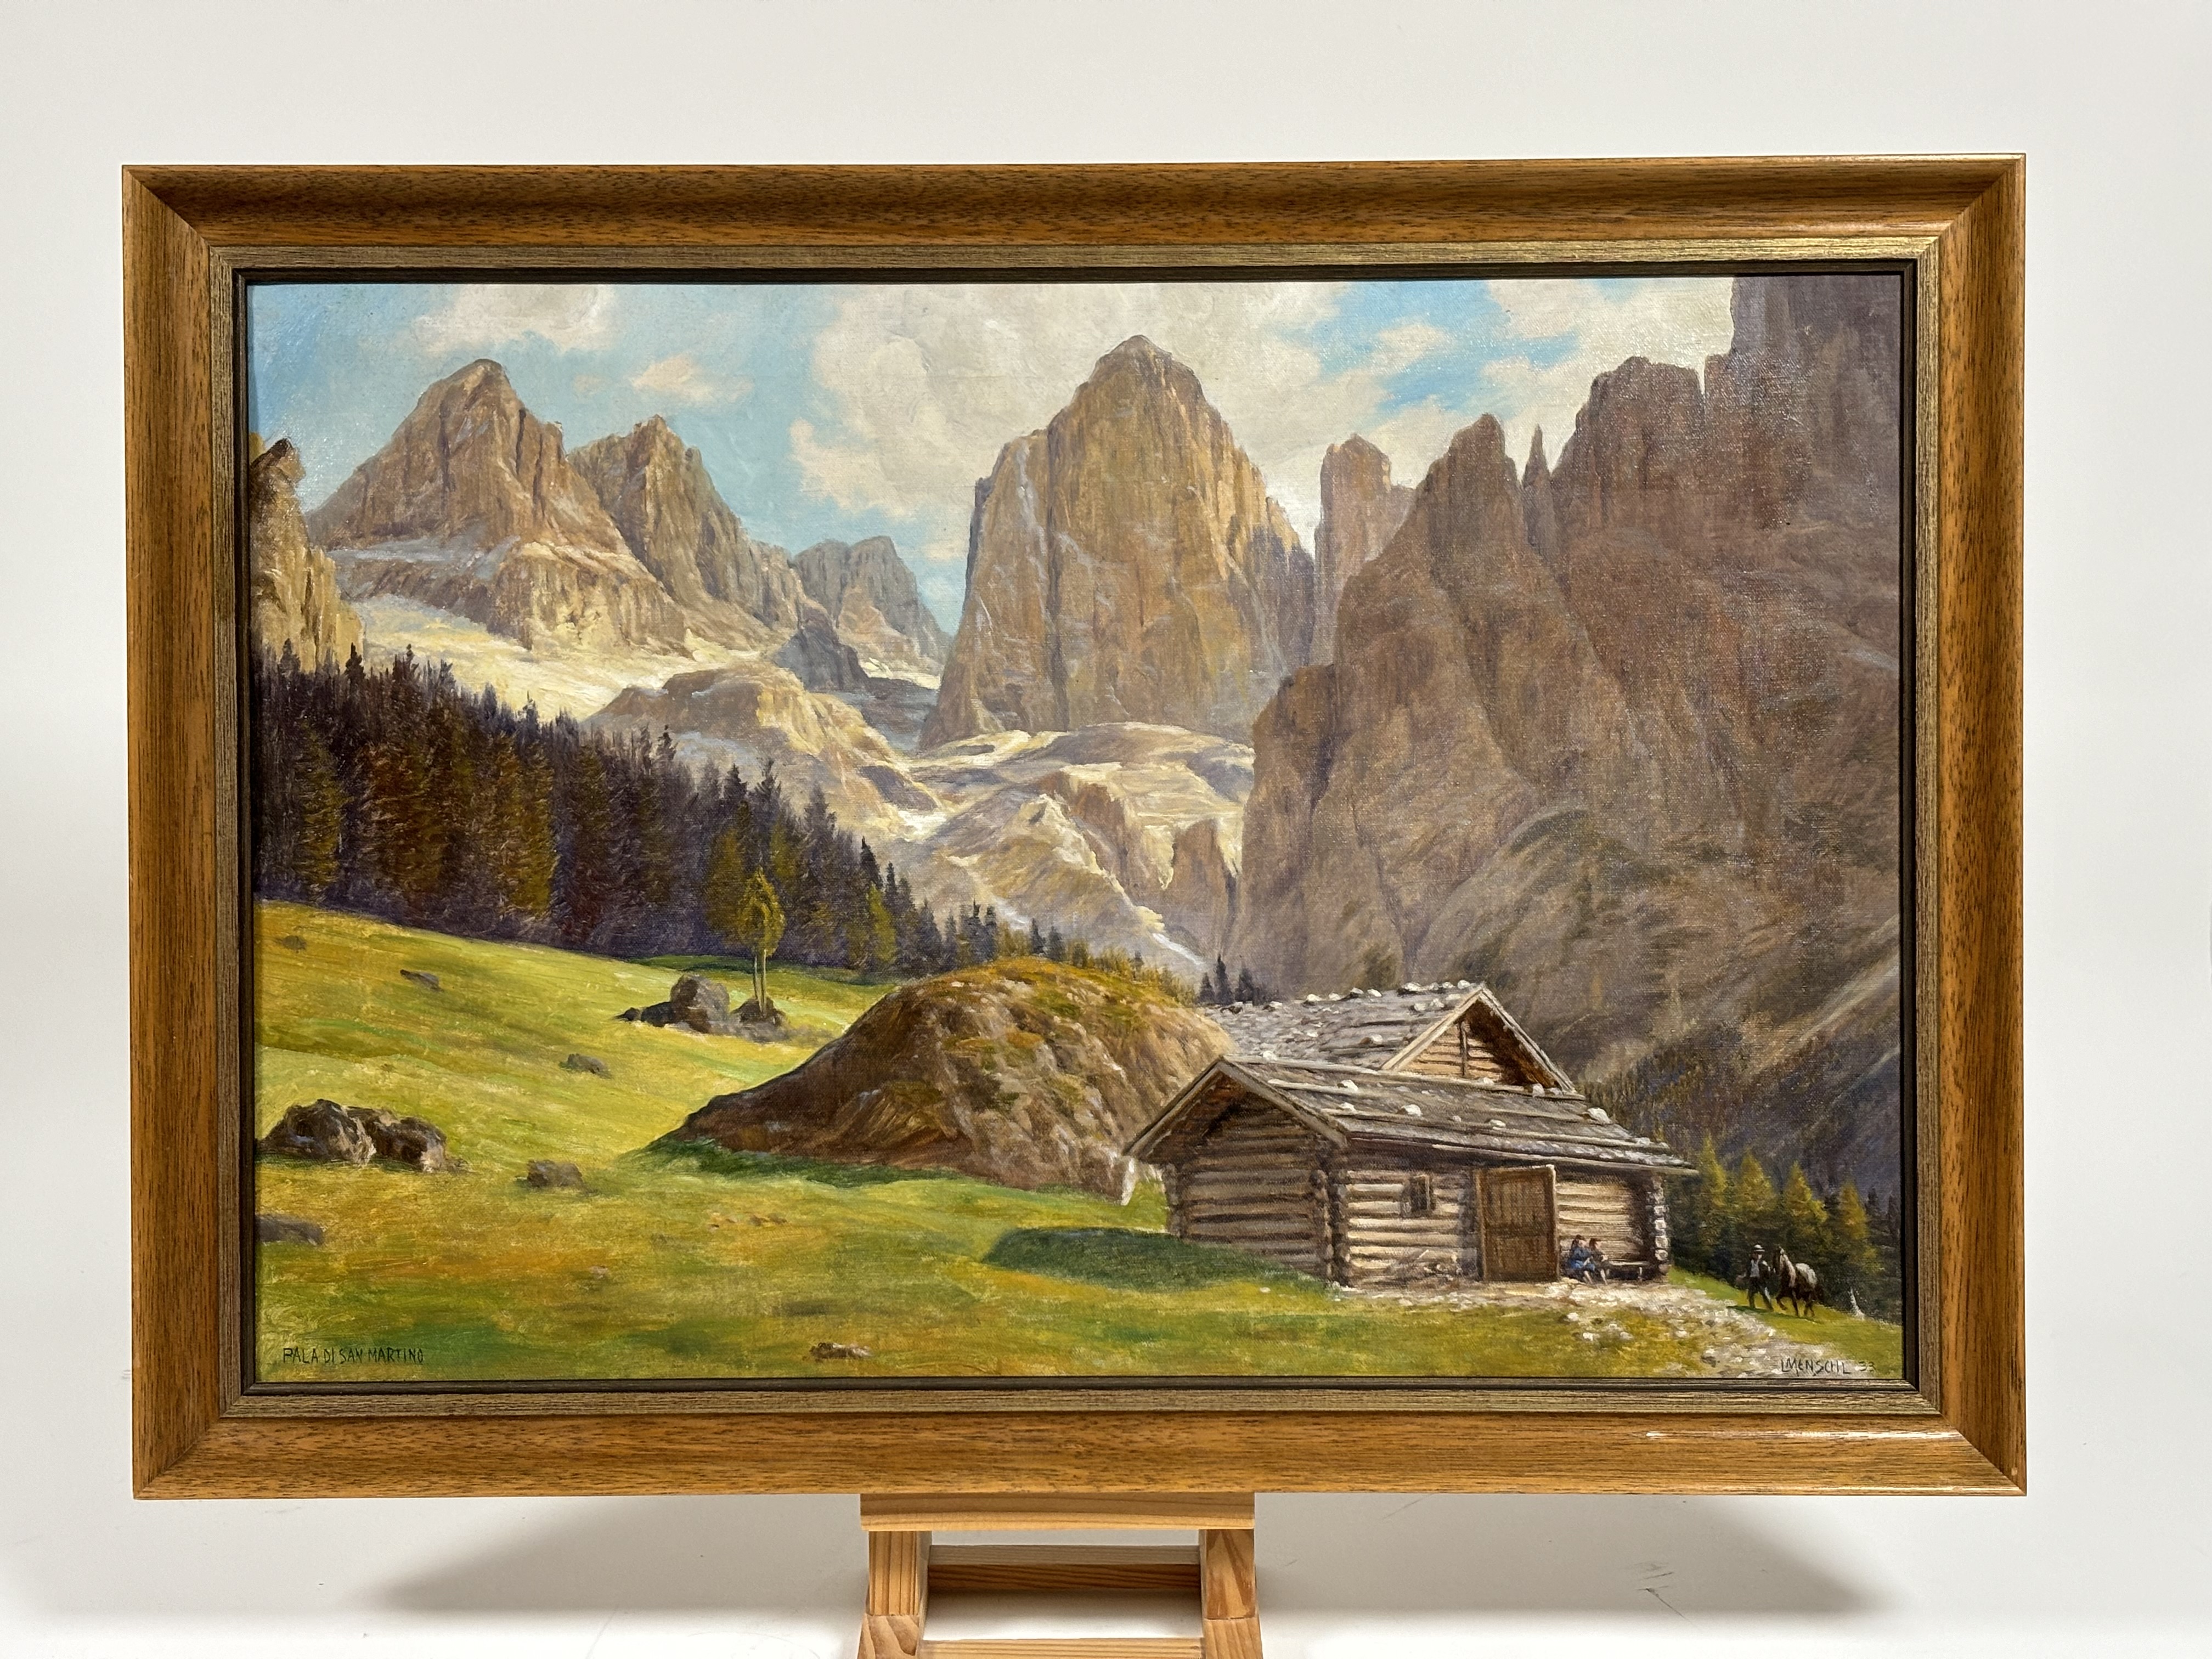 L.Menschl, Study of an Italian Mountain -  "Pala di san Martino", titled, signed and dated 33, oil